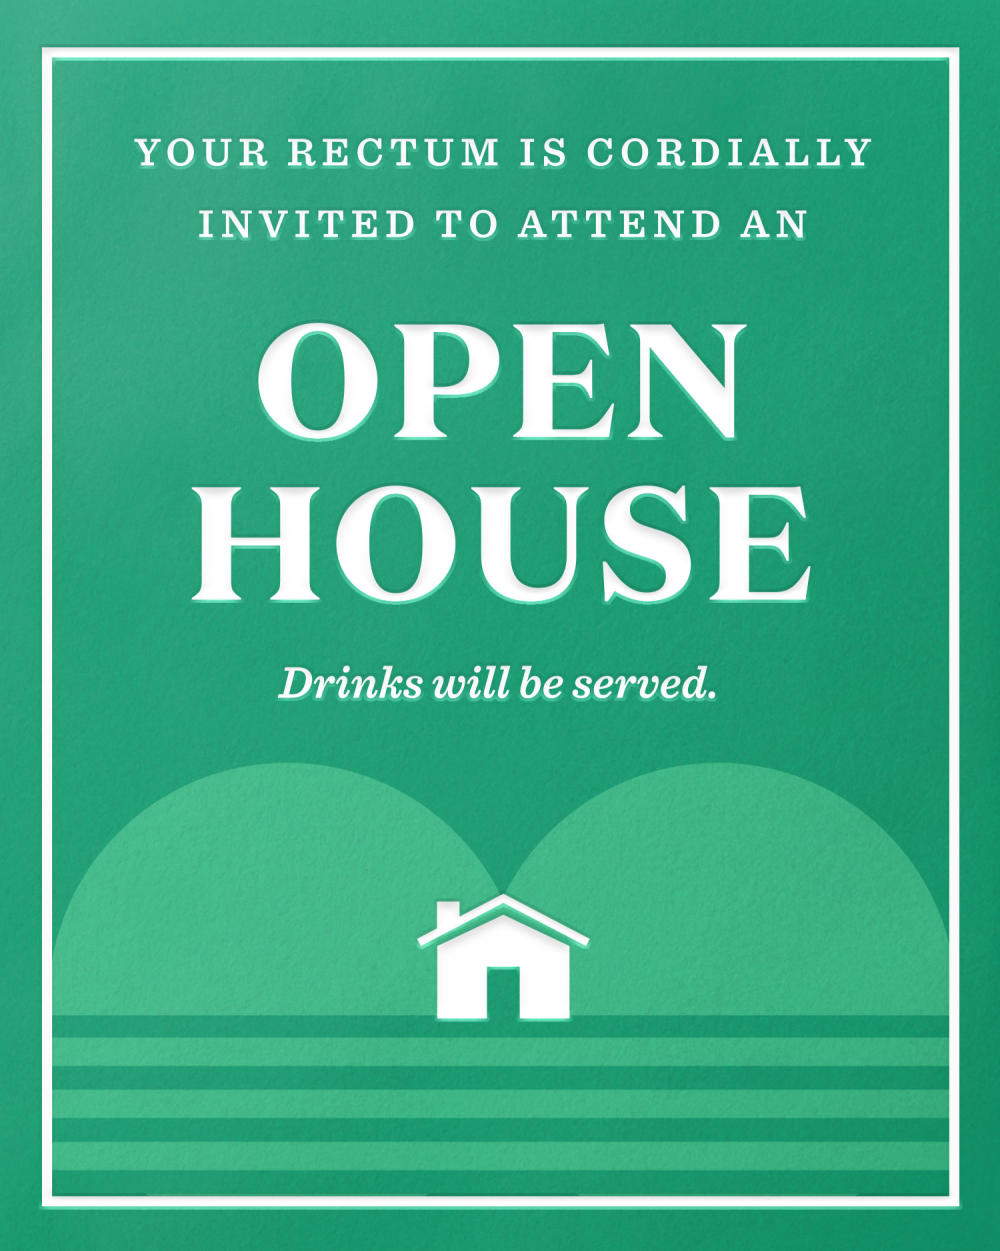 Your Rectum is cordially invited to attend an open house.